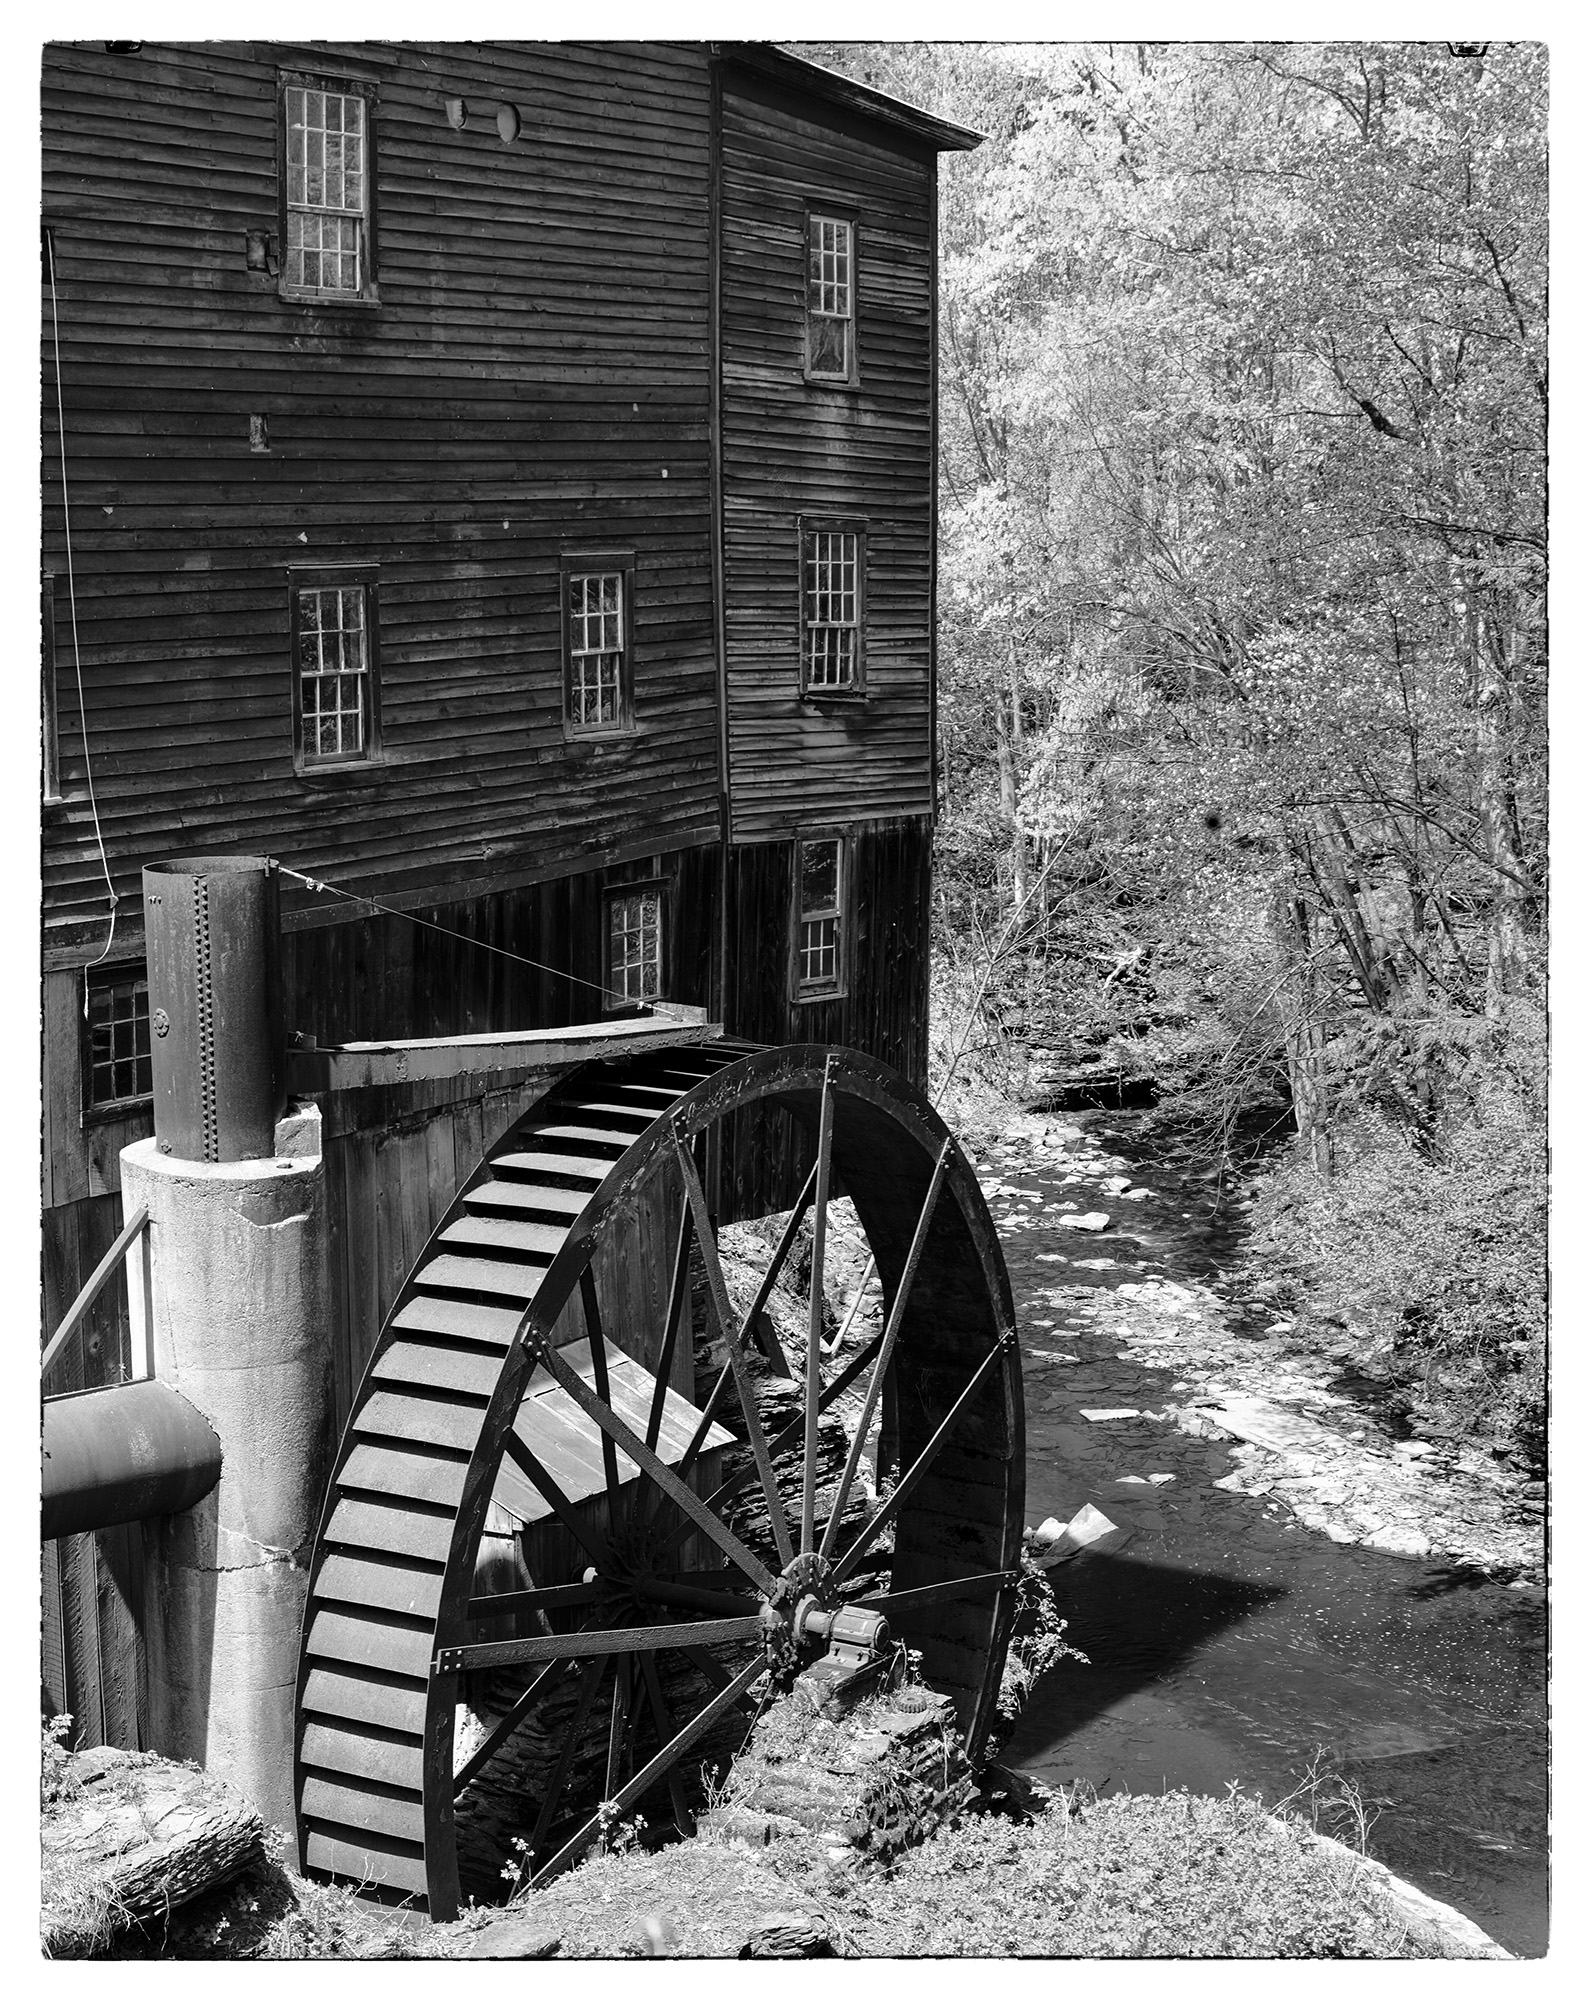 This vertical image, captured with my Ebony SV45Te View Camera on Kodak TMax film, transports us to New Hope Mills, New York....